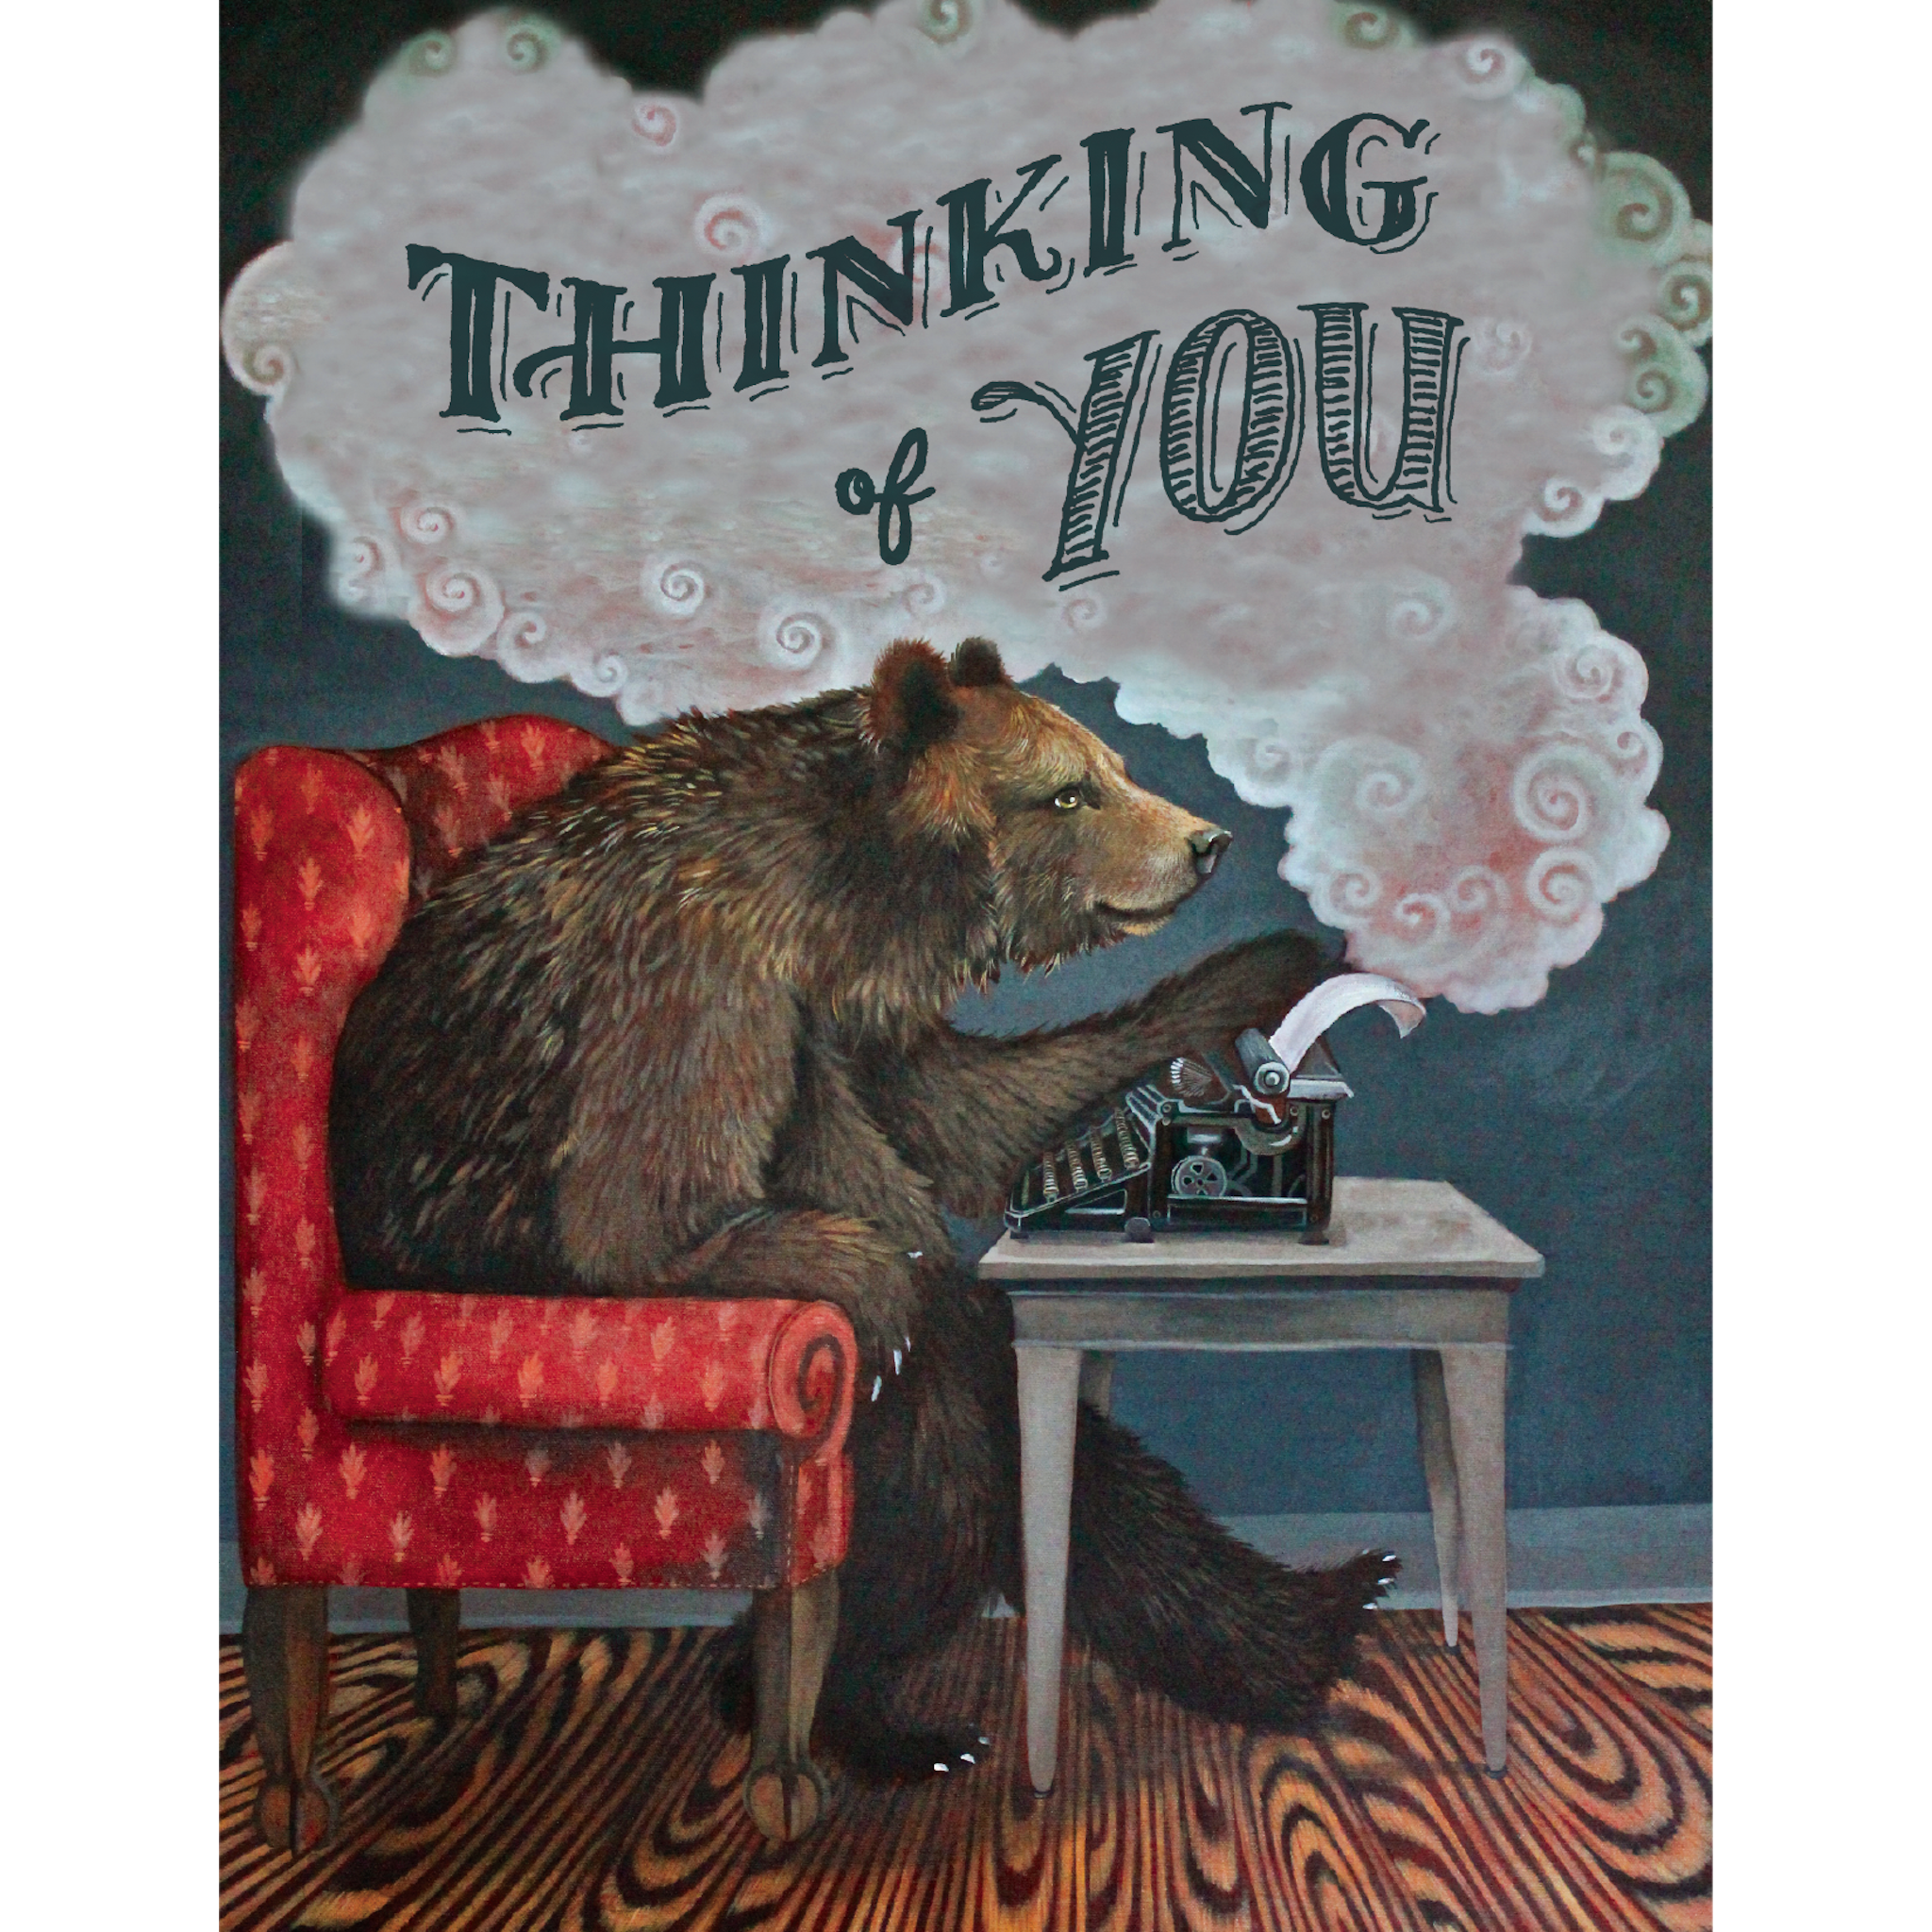 A bear seated on a red chair using an old-fashioned rotary phone, with a thought bubble reading &quot;thinking of you&quot; above it. This image is featured on an original artwork Thinking of You card by Hester &amp; Cook.